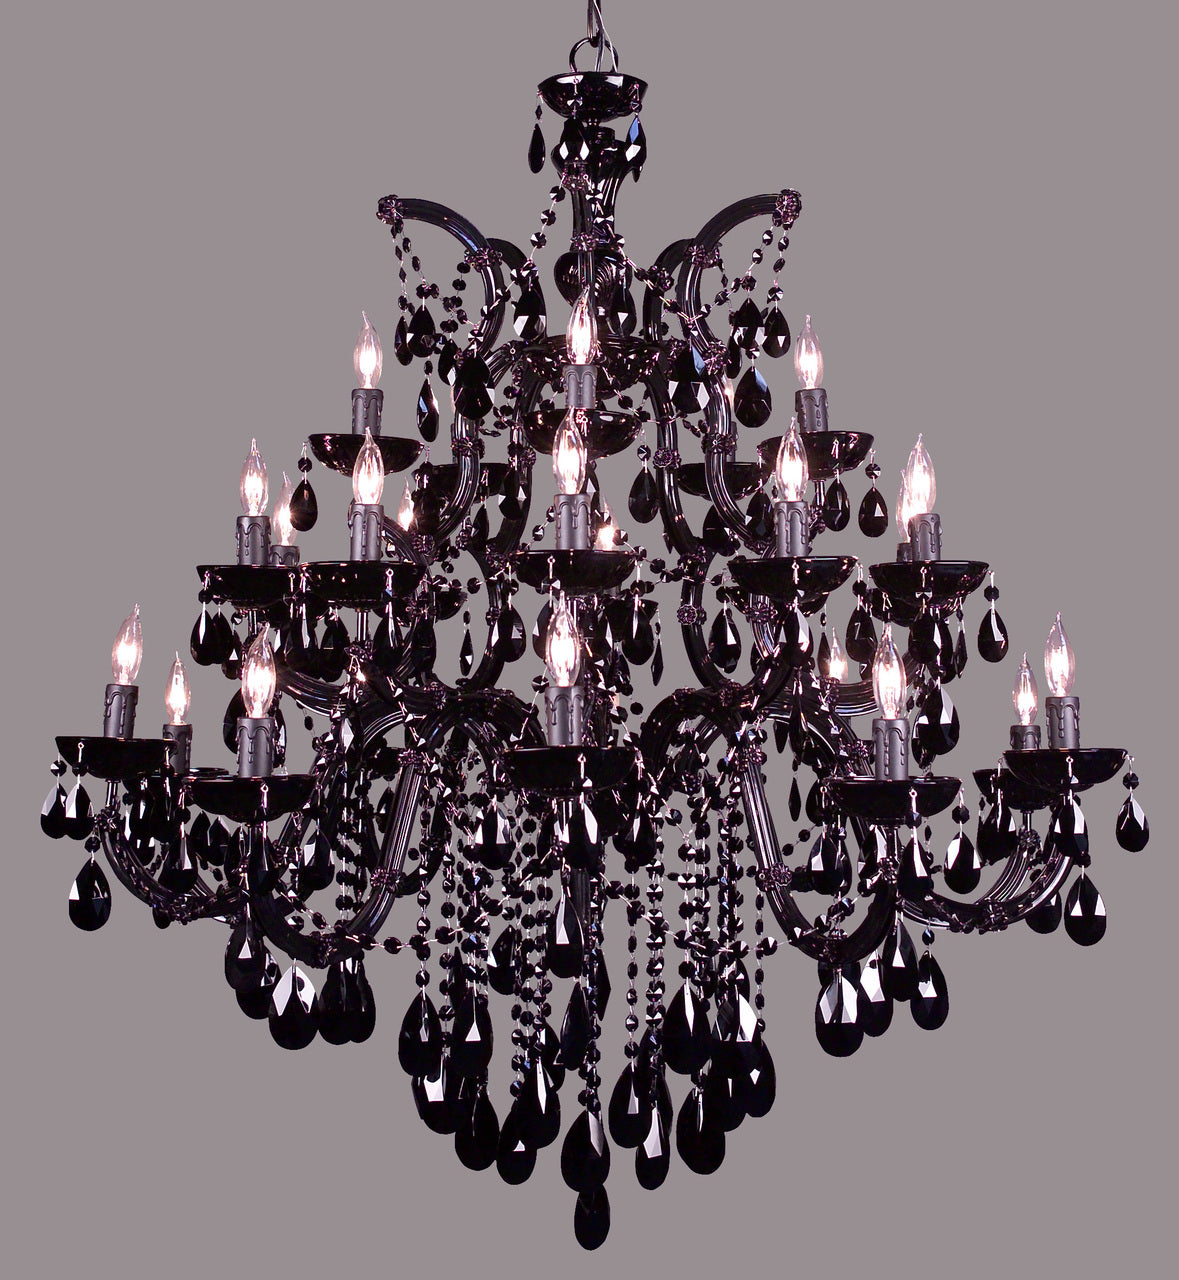 Classic Lighting 8349 BBLK SJT Rialto Traditional Crystal Chandelier in Black